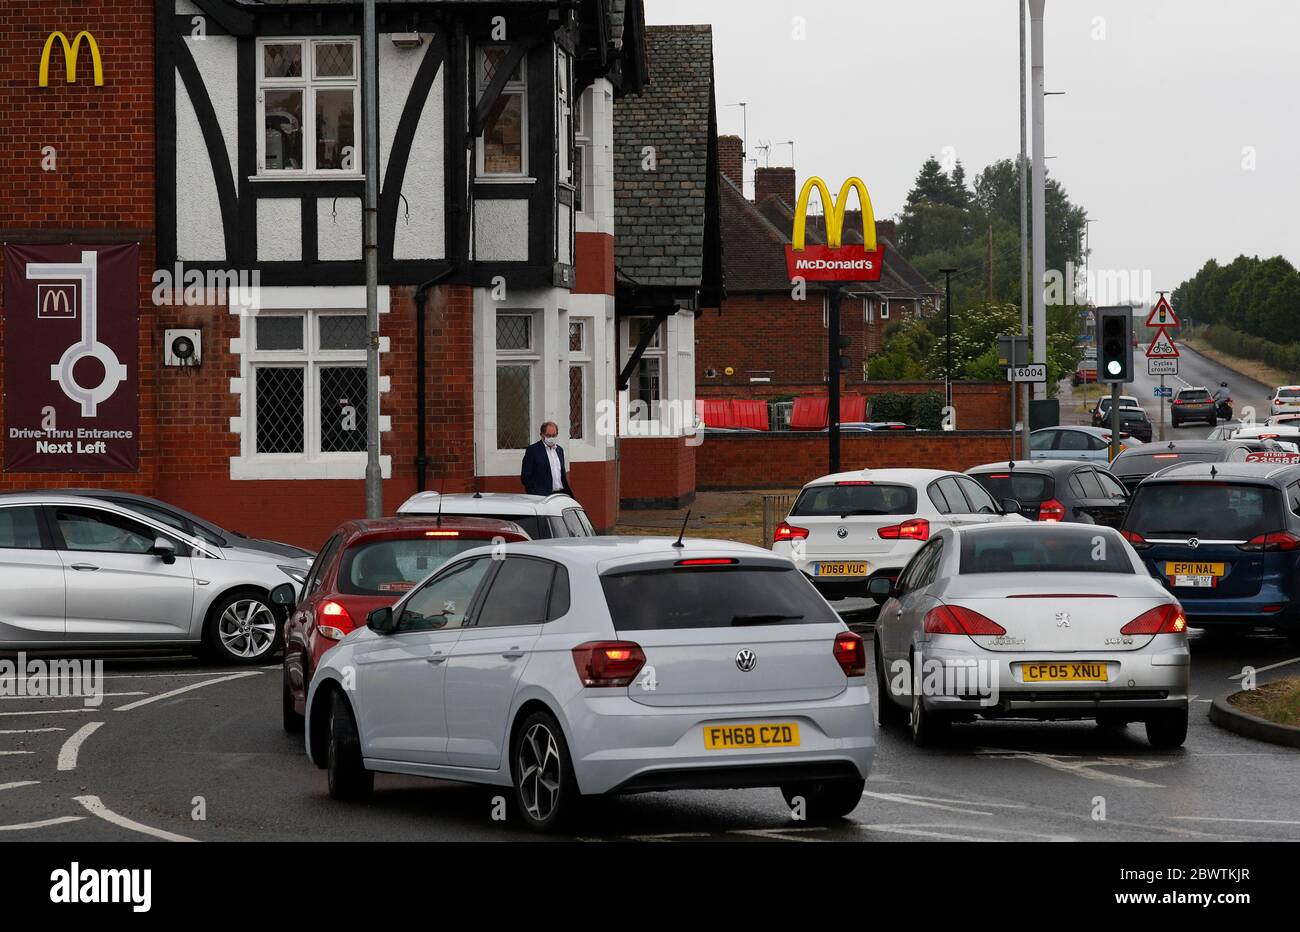 Loughborough, Leicestershire, UK. 3rd June 2020. A queue of cars forms at a McDonaldÕs drive-through restaurant that has reopened after coronavirus pandemic lockdown restrictions were eased. Credit Darren Staples/Alamy Live News. Stock Photo